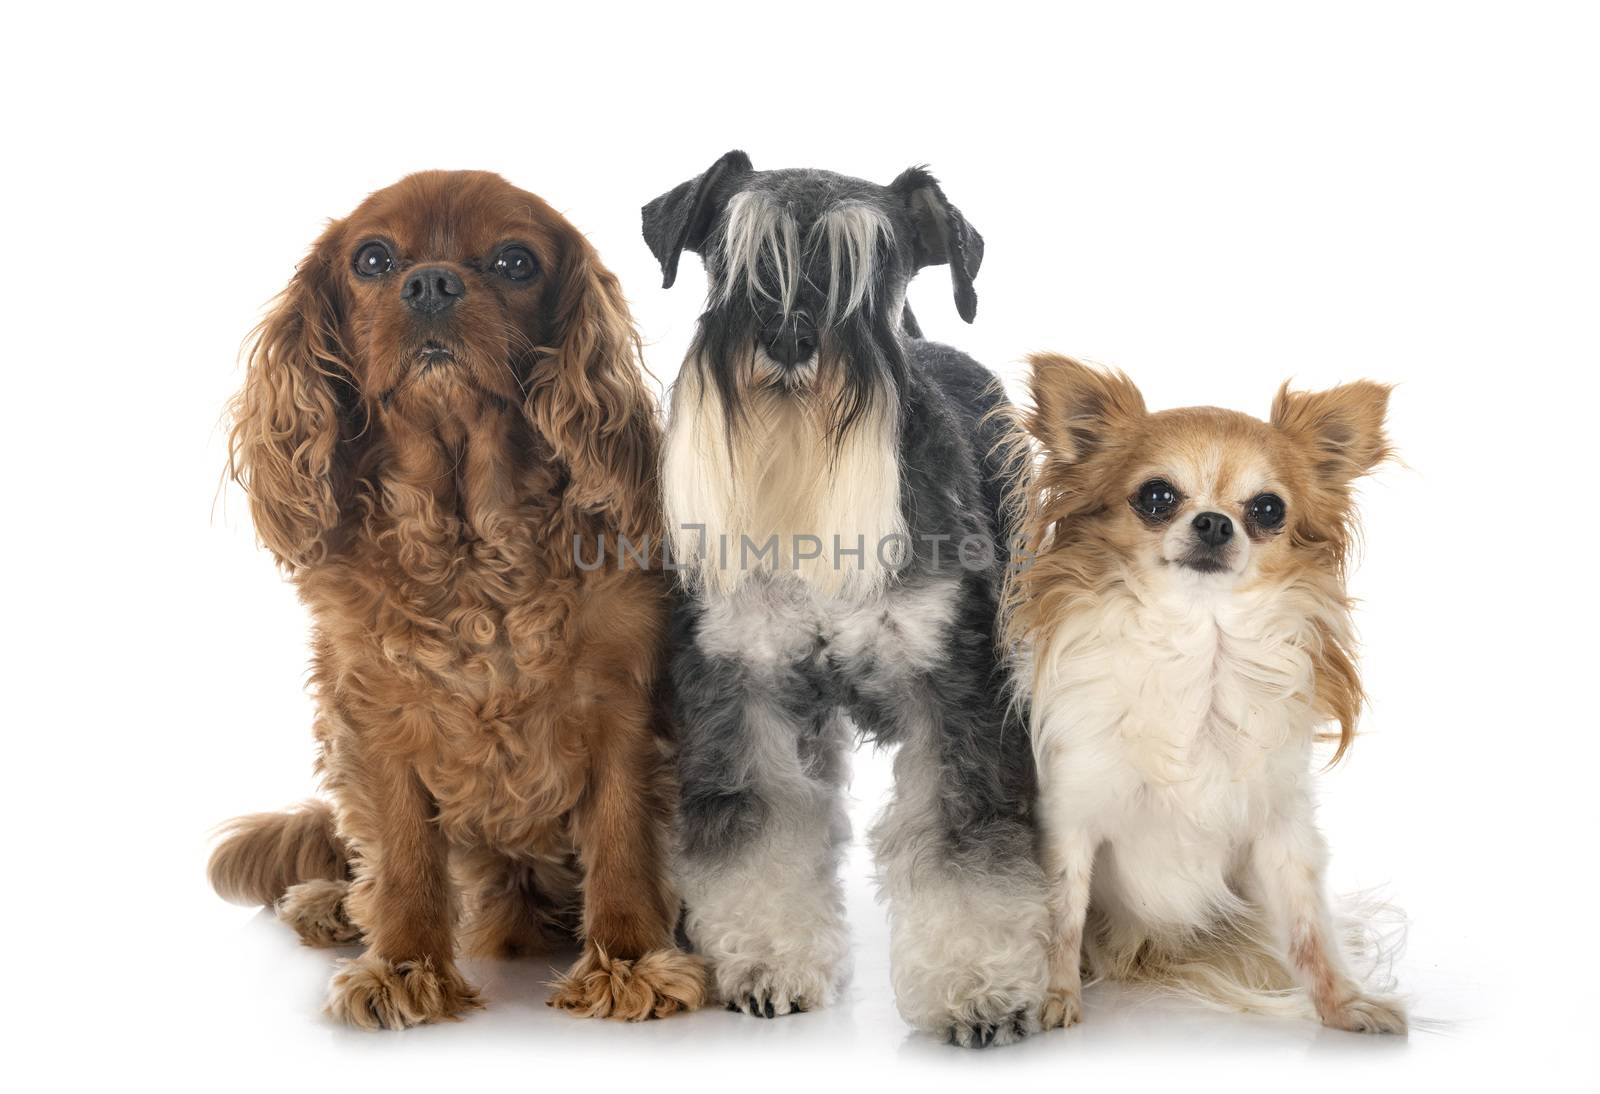 miniature schnauzer and cavalier king charles in front of white background